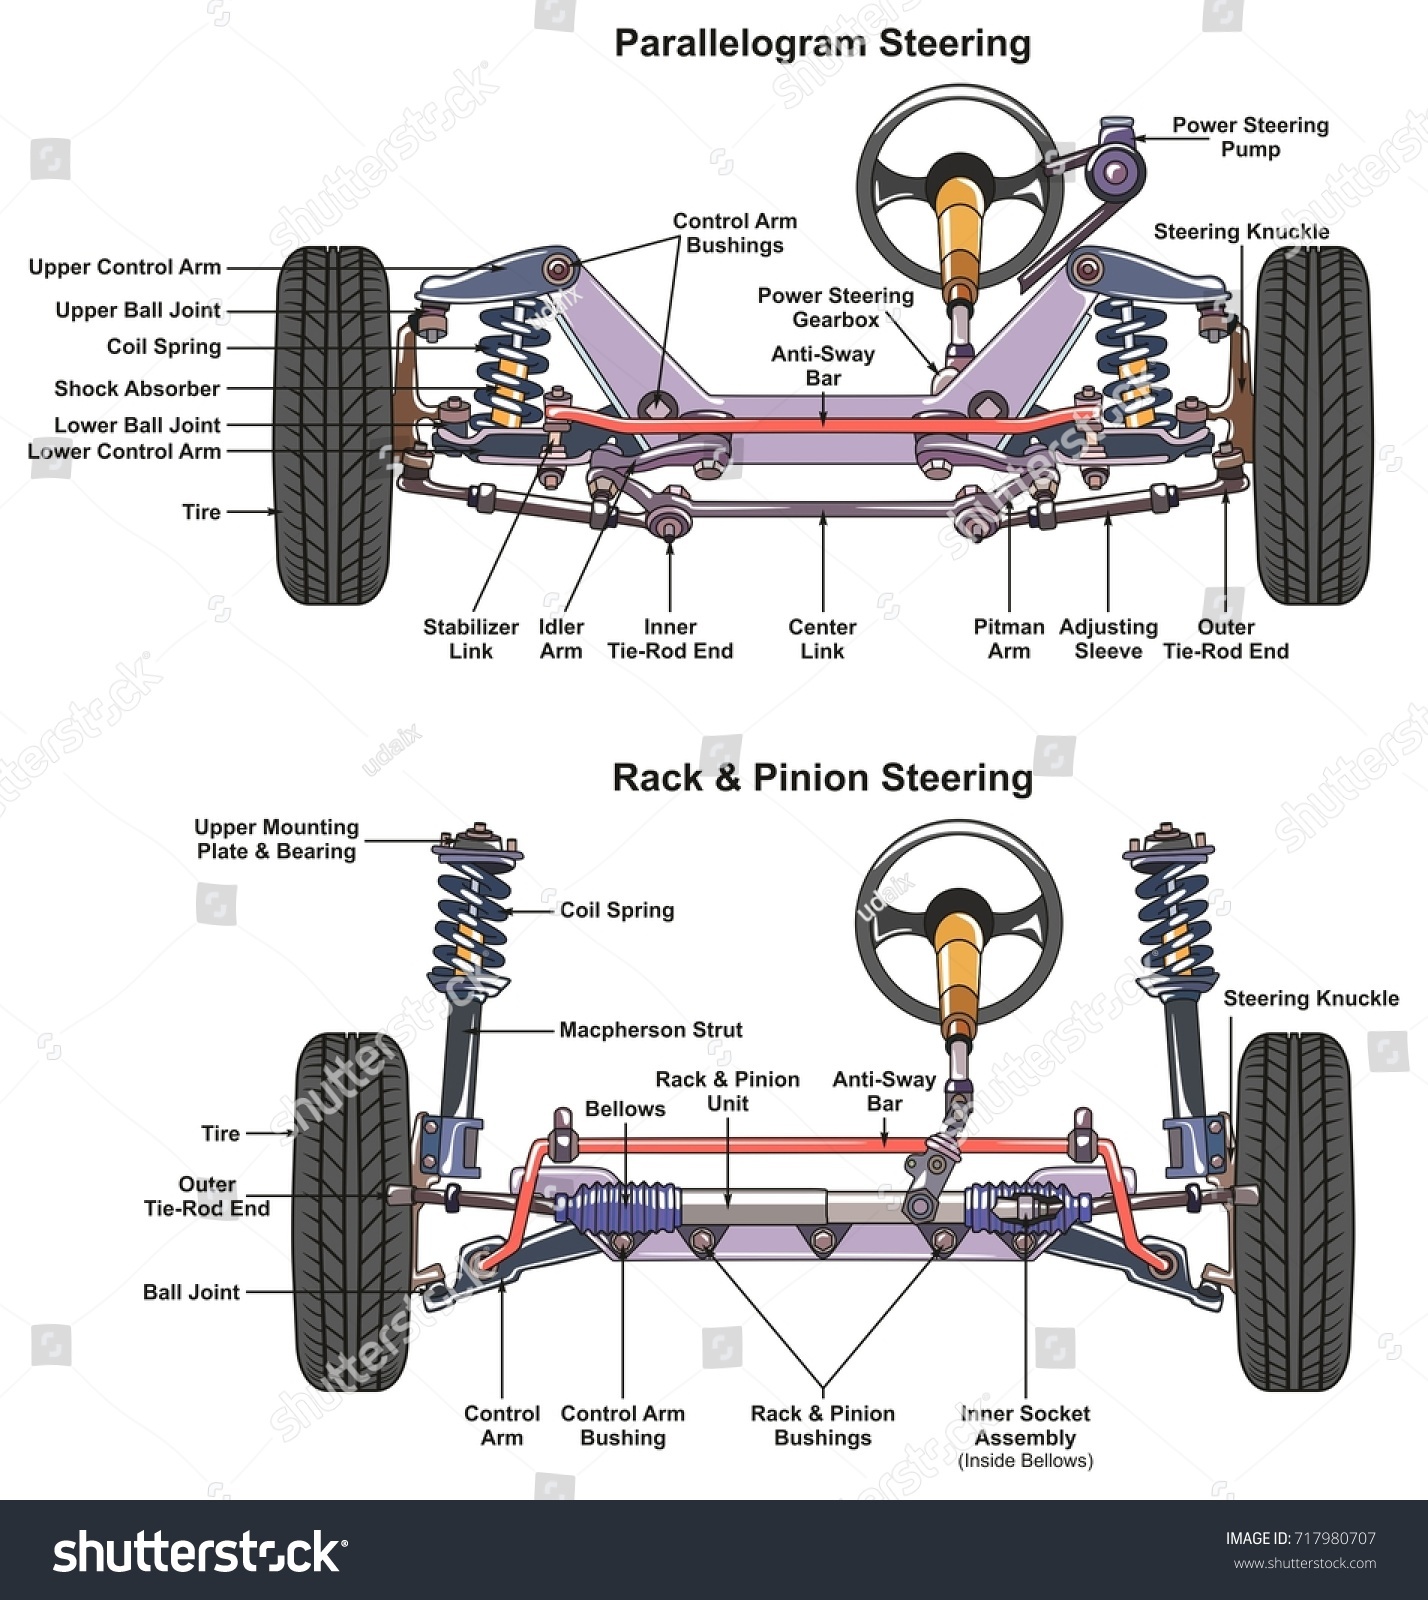 Automotive Steering System Infographic Diagram Showing